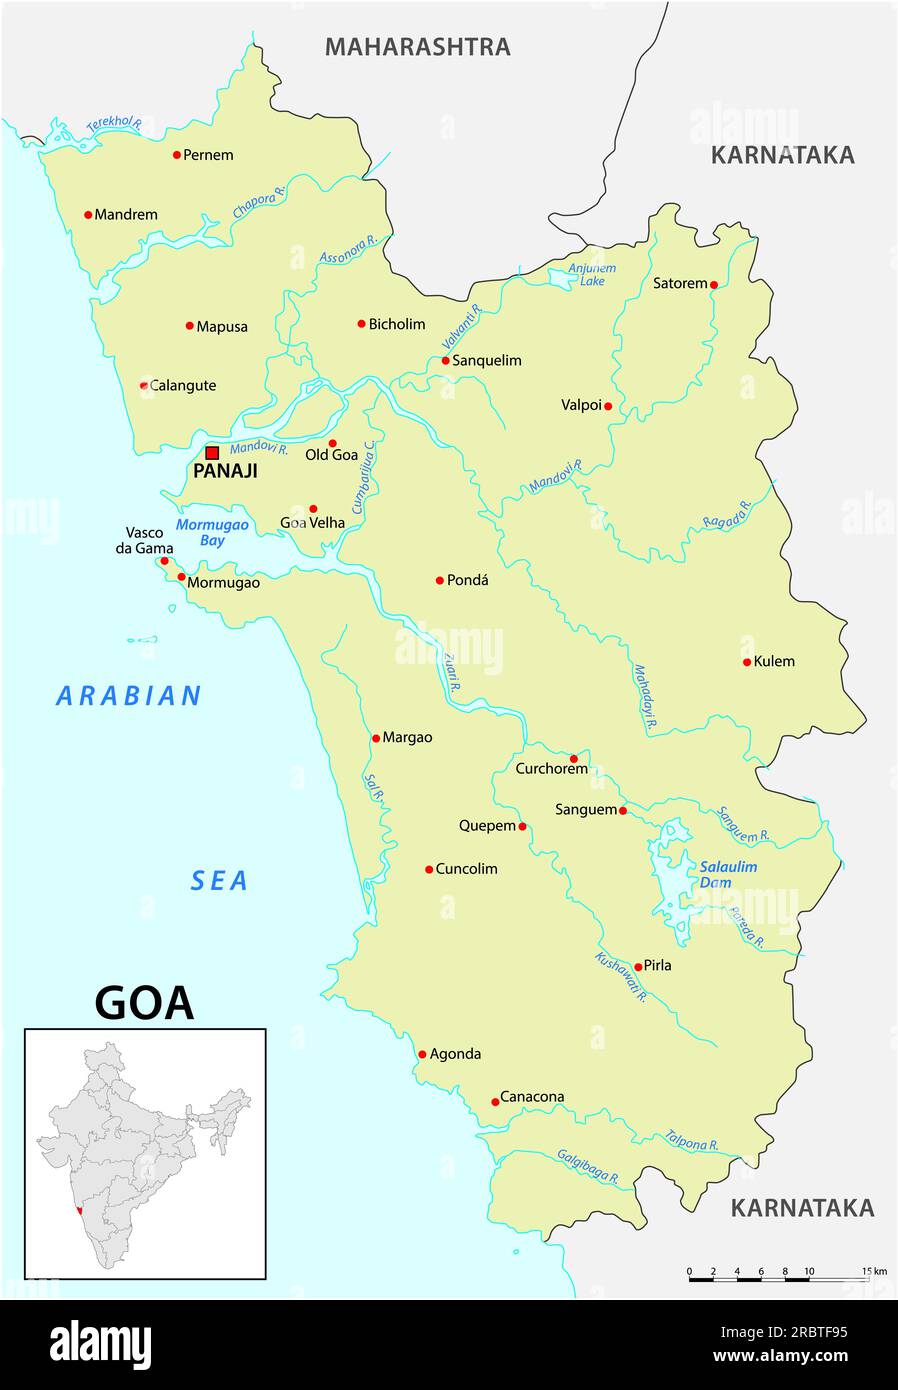 Vector map of the Indian state of Goa Stock Photo